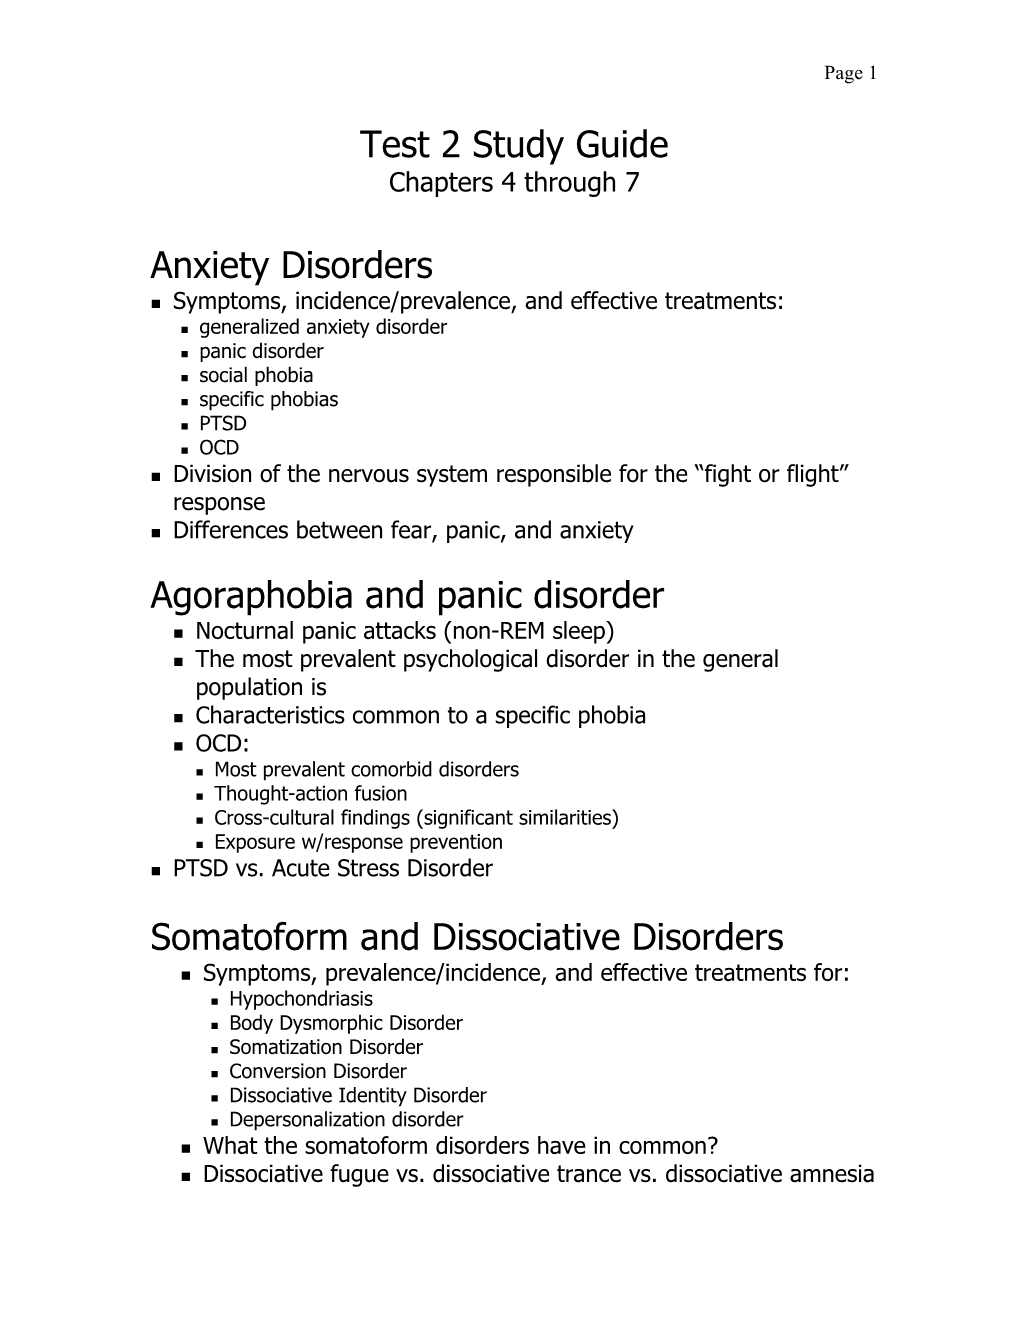 Test 2 Study Guide Anxiety Disorders Agoraphobia and Panic Disorder